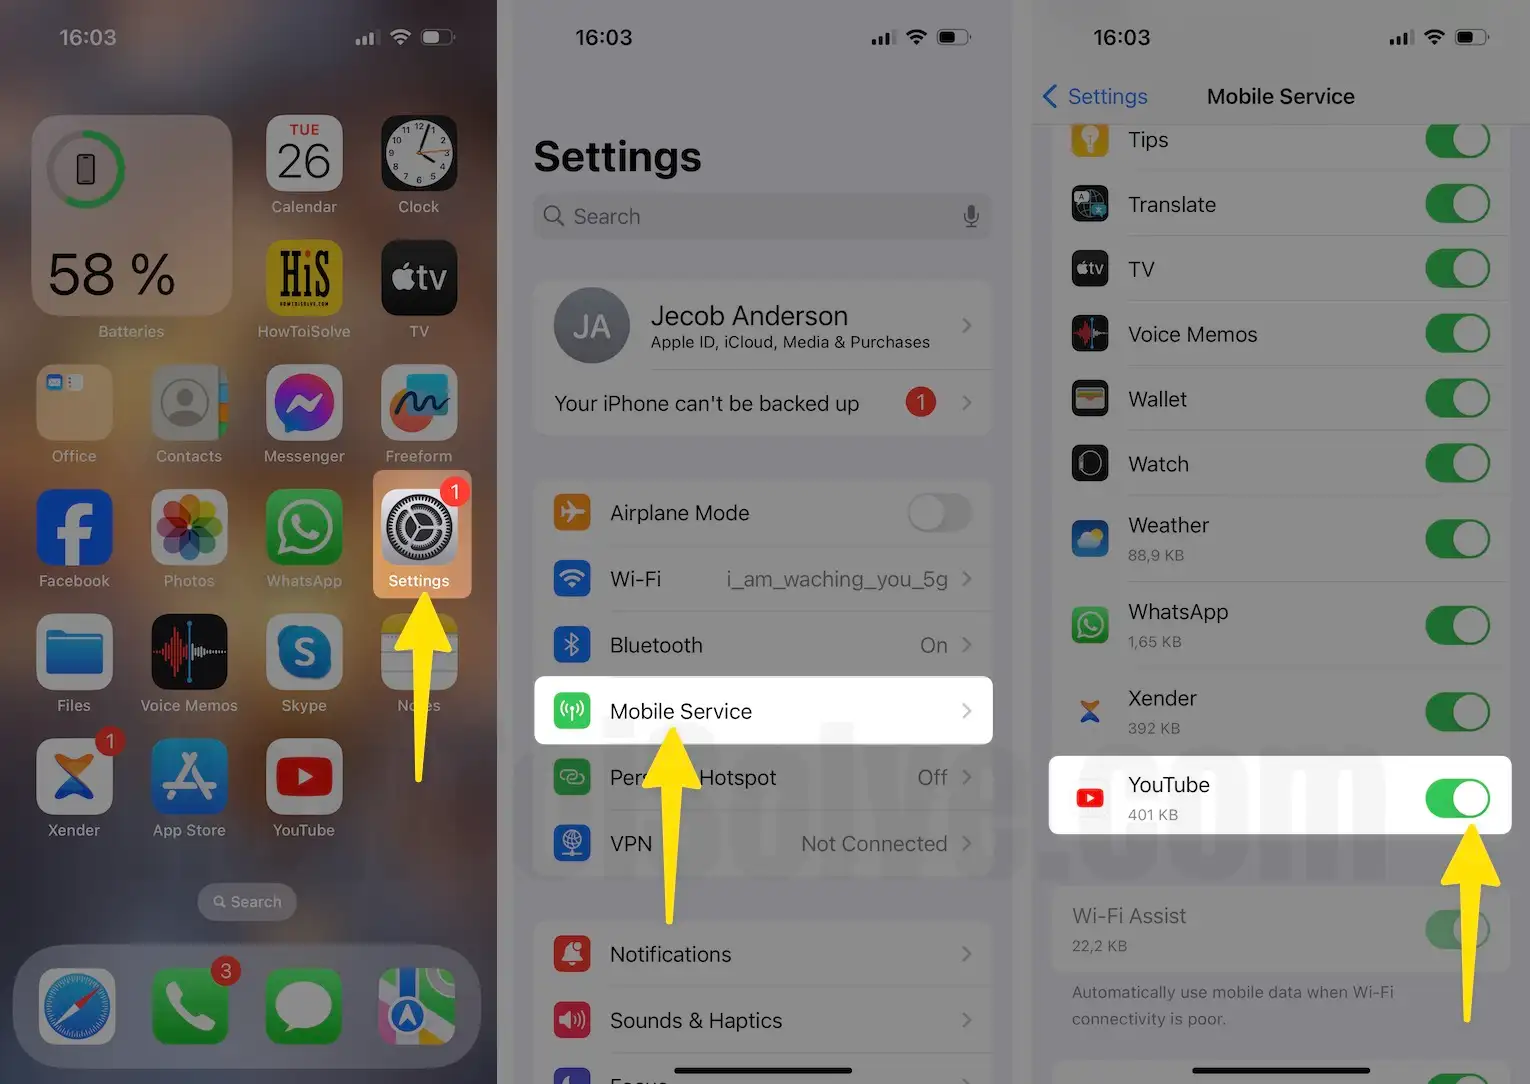 Launch the settings app tap on mobile service turn on youtube on iPhone